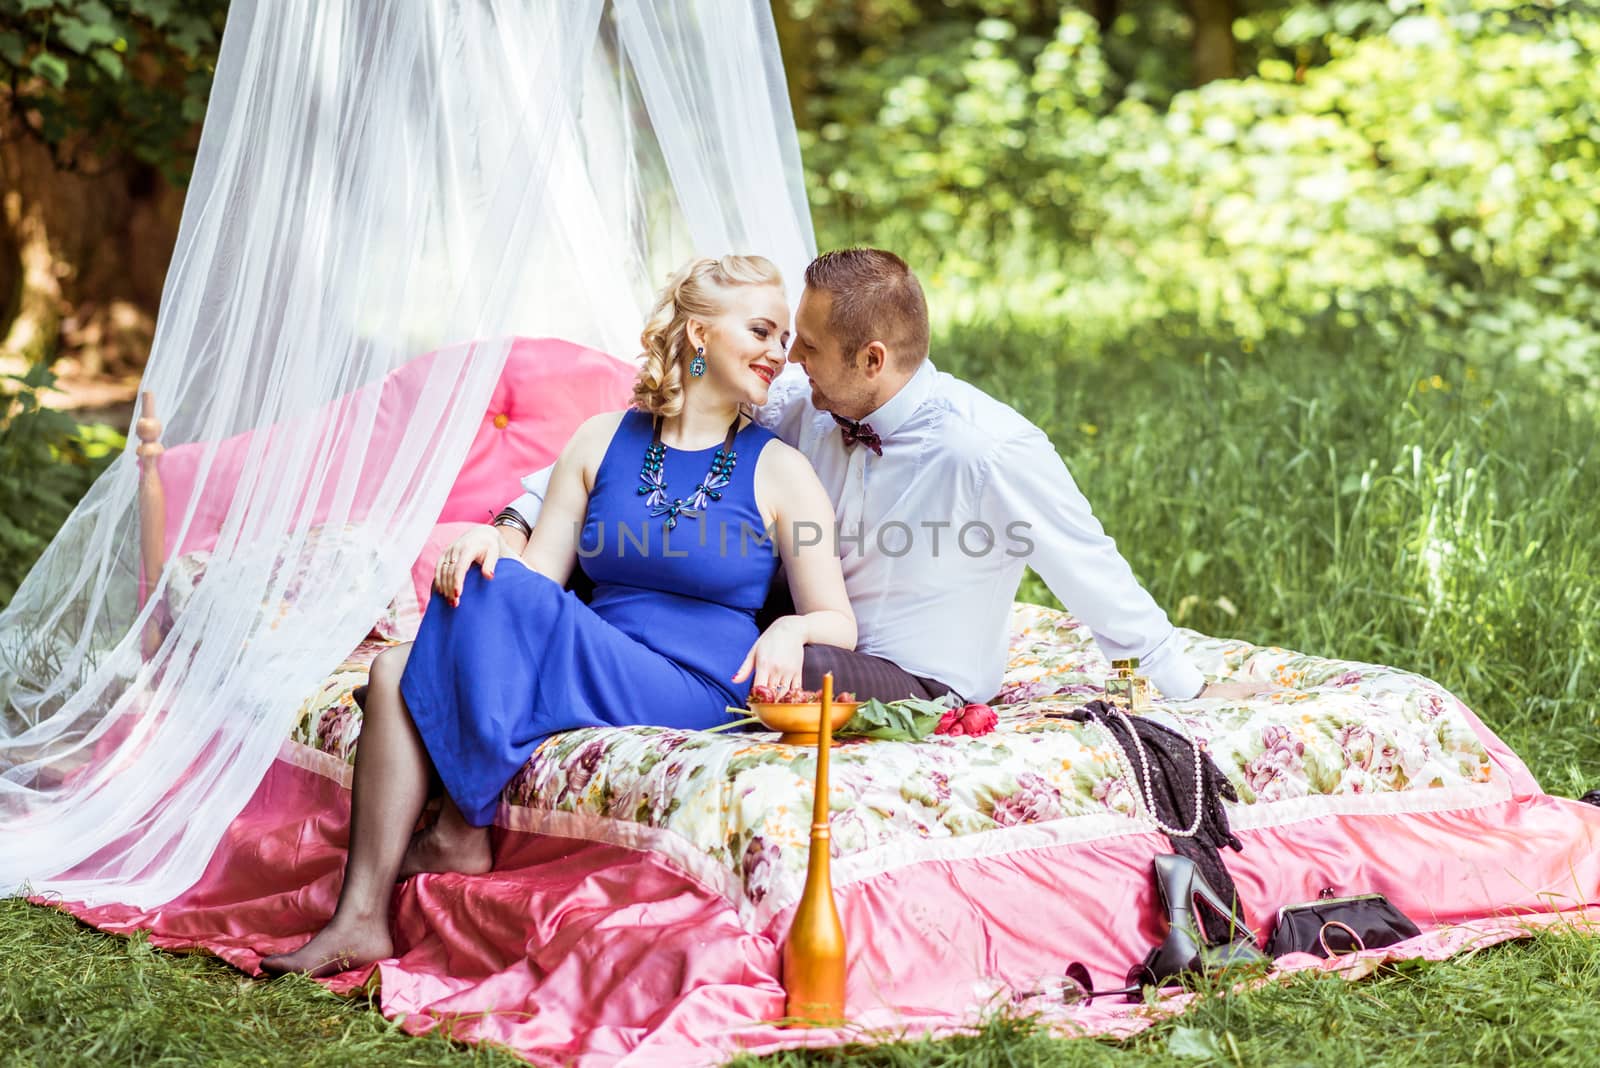 Man and woman sitting on the bed and looking at each other in the lawn in Lviv, Ukraine.